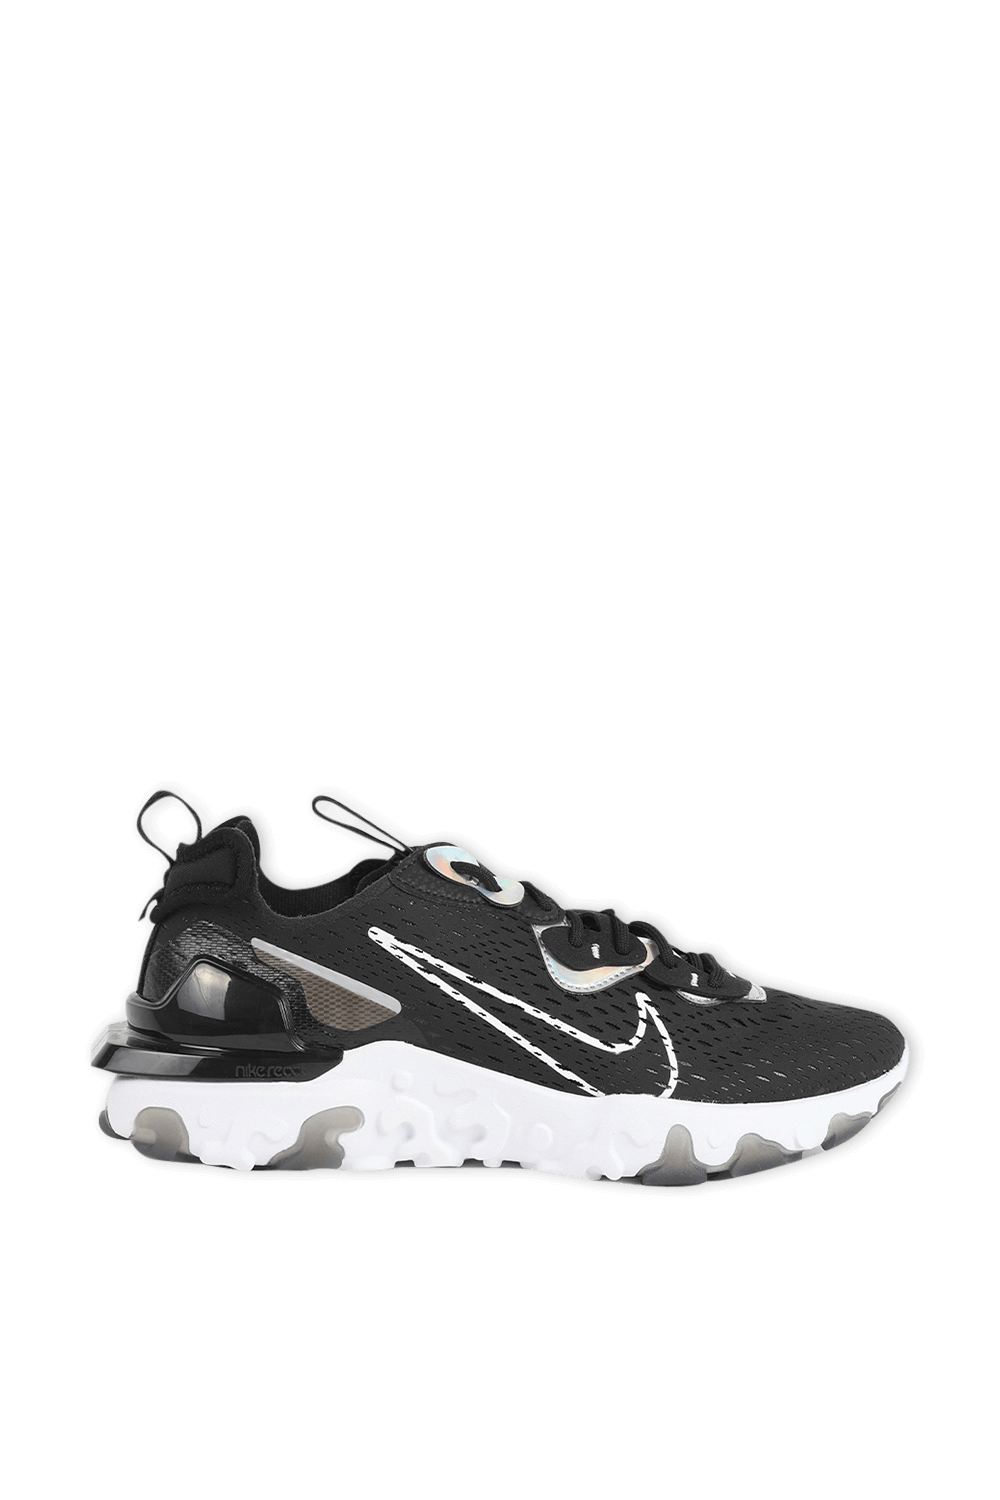 Nike NSW React Vision Essential in Black and White NIKE